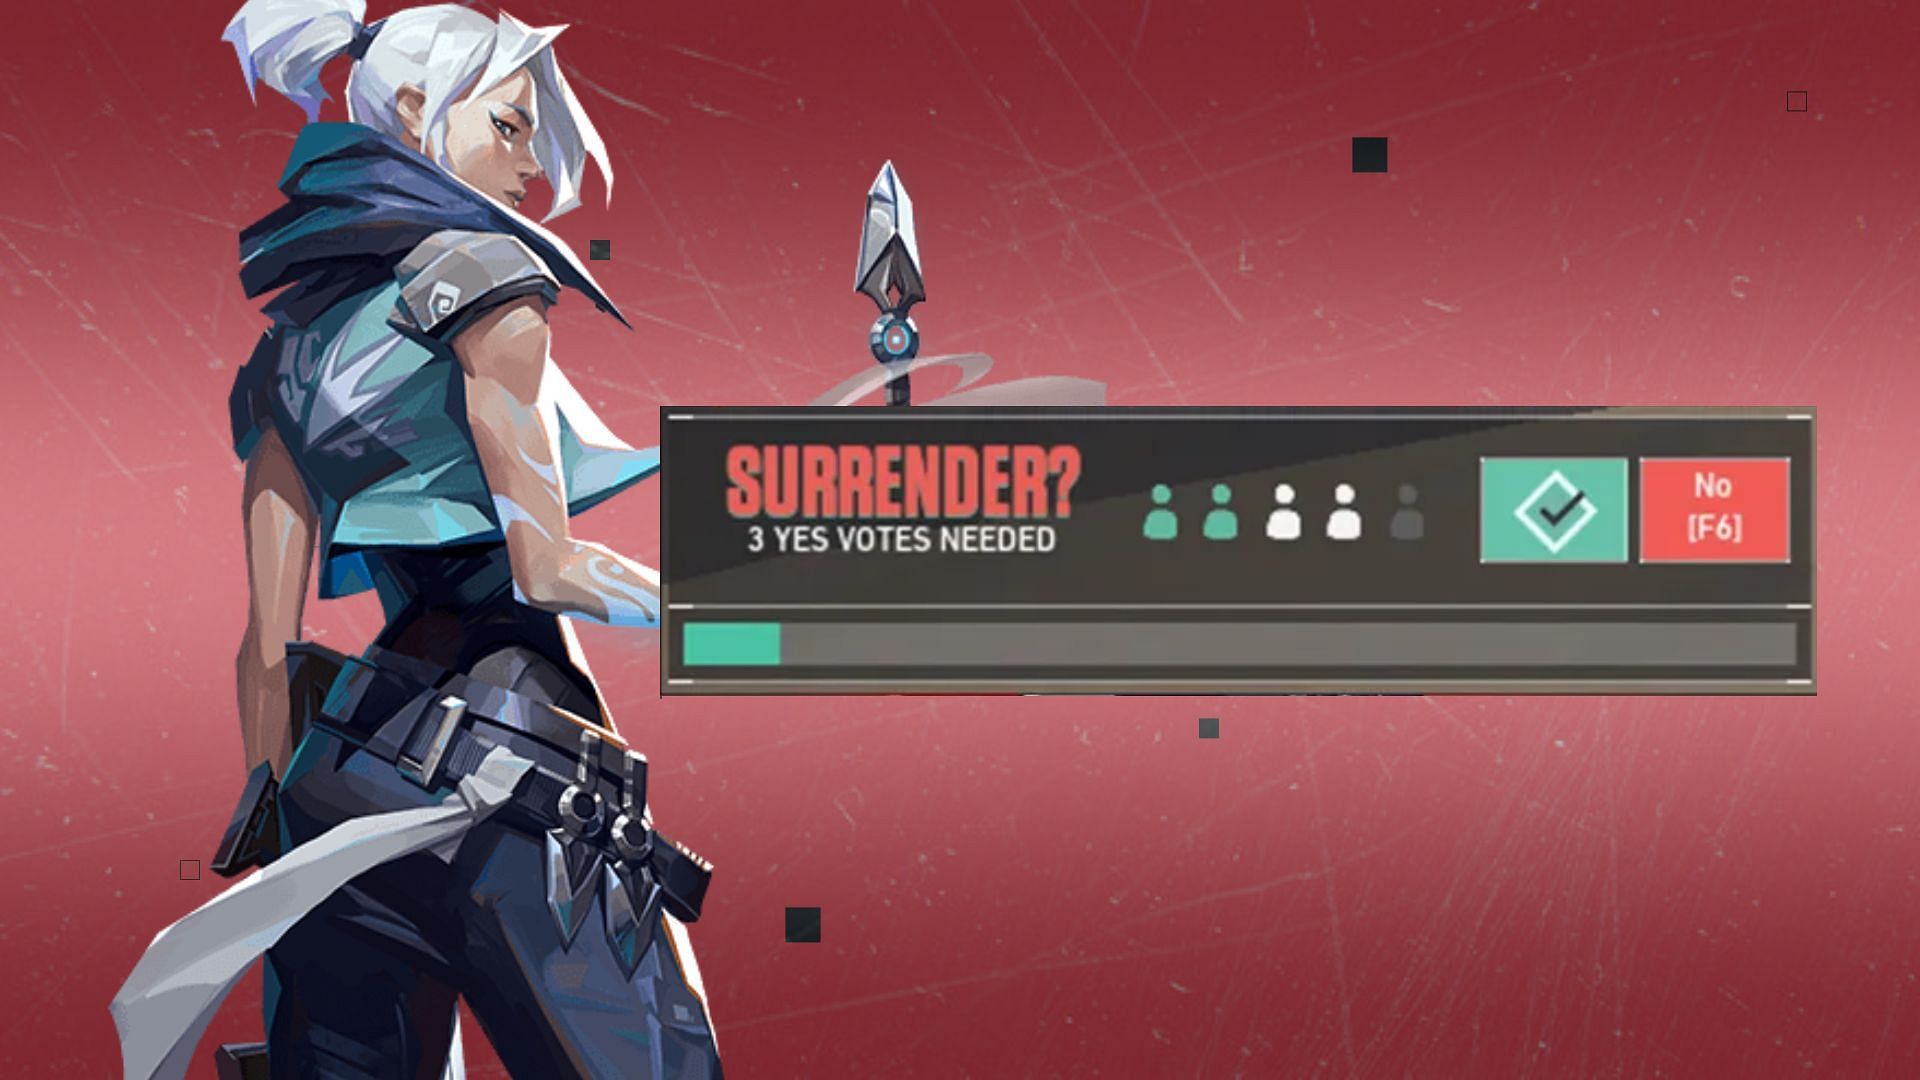 How to Surrender in League of Legends: 3 Steps (with Pictures)